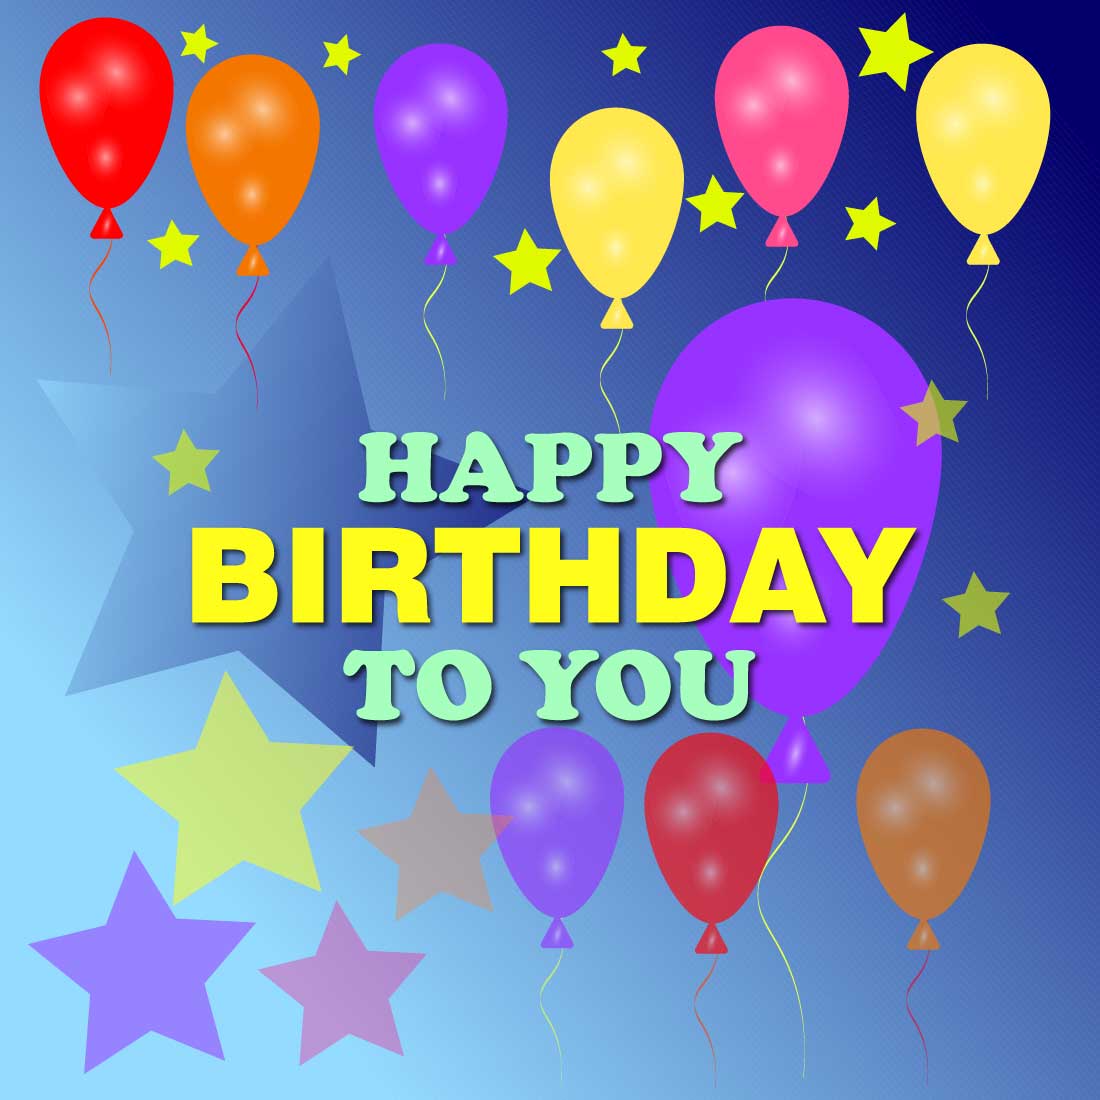 Happy Birthday Card Design with Balloons and Stars AI, PSD and EPS file and high quality JPG image in a zipped folder preview image.